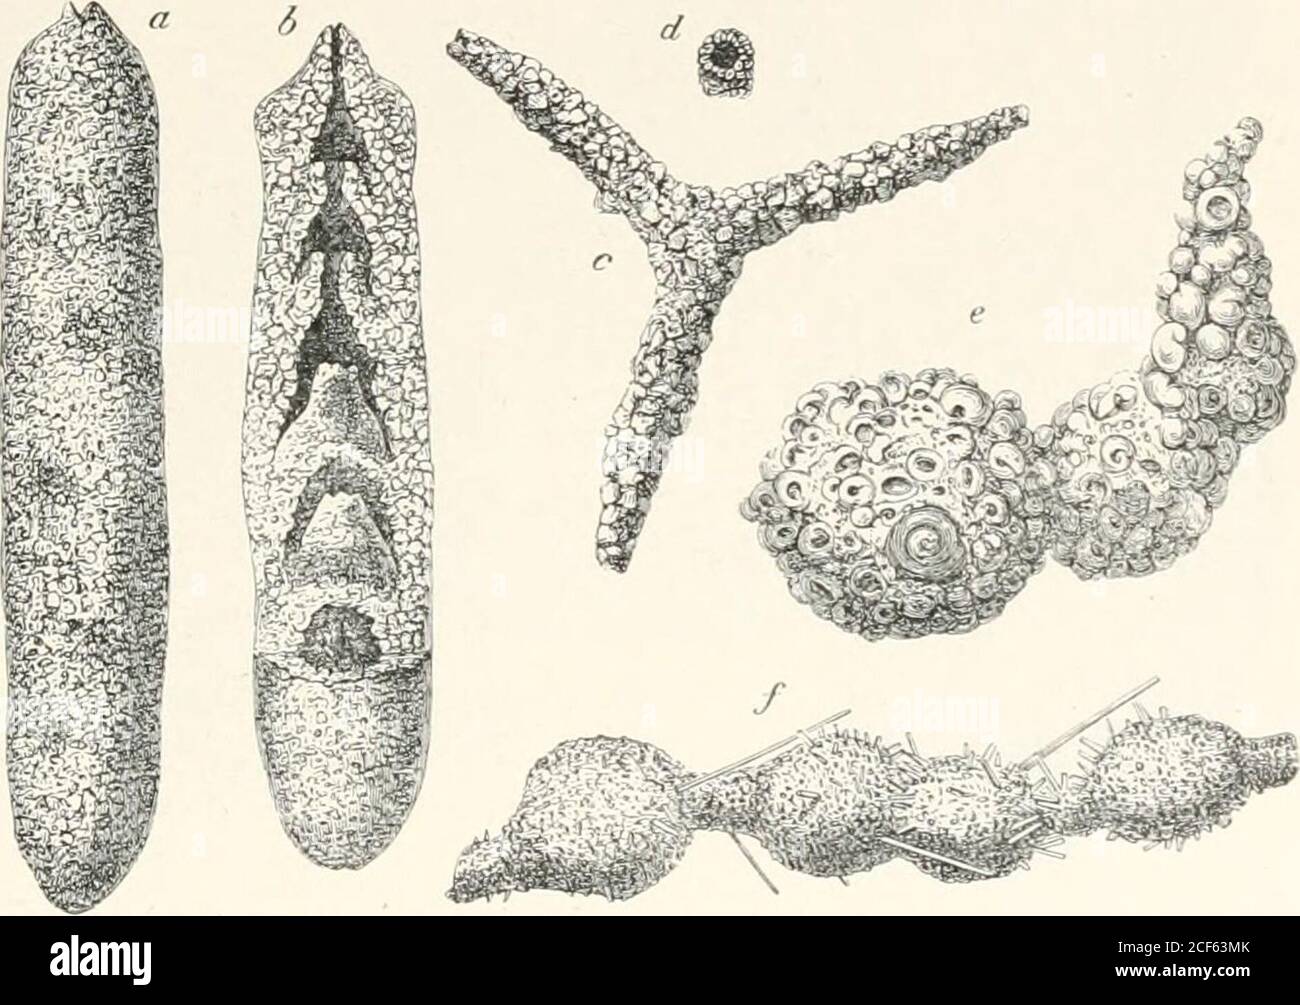 . The microscope and its revelations. ii run Mti /tri/i/ix, AEENACEOUS FORAMINIFERA 8l5 Thurammina papillata (fig. 614, g) a not less remarkable imitation ofthe Orbuline. This last is specially noteworthy for the admirablemanner in which its component sand-grains are set together, thesebeing small and very uniform in size, and being disposed in. such amanner as to present a smooth surface both inside and out (fig. 614, A),whilst there are at intervals nipple-shaped protuberances, in every oneof which there is a rounded orifice. A like perfection of finish is seenin the test of Hormosina glcibu Stock Photo